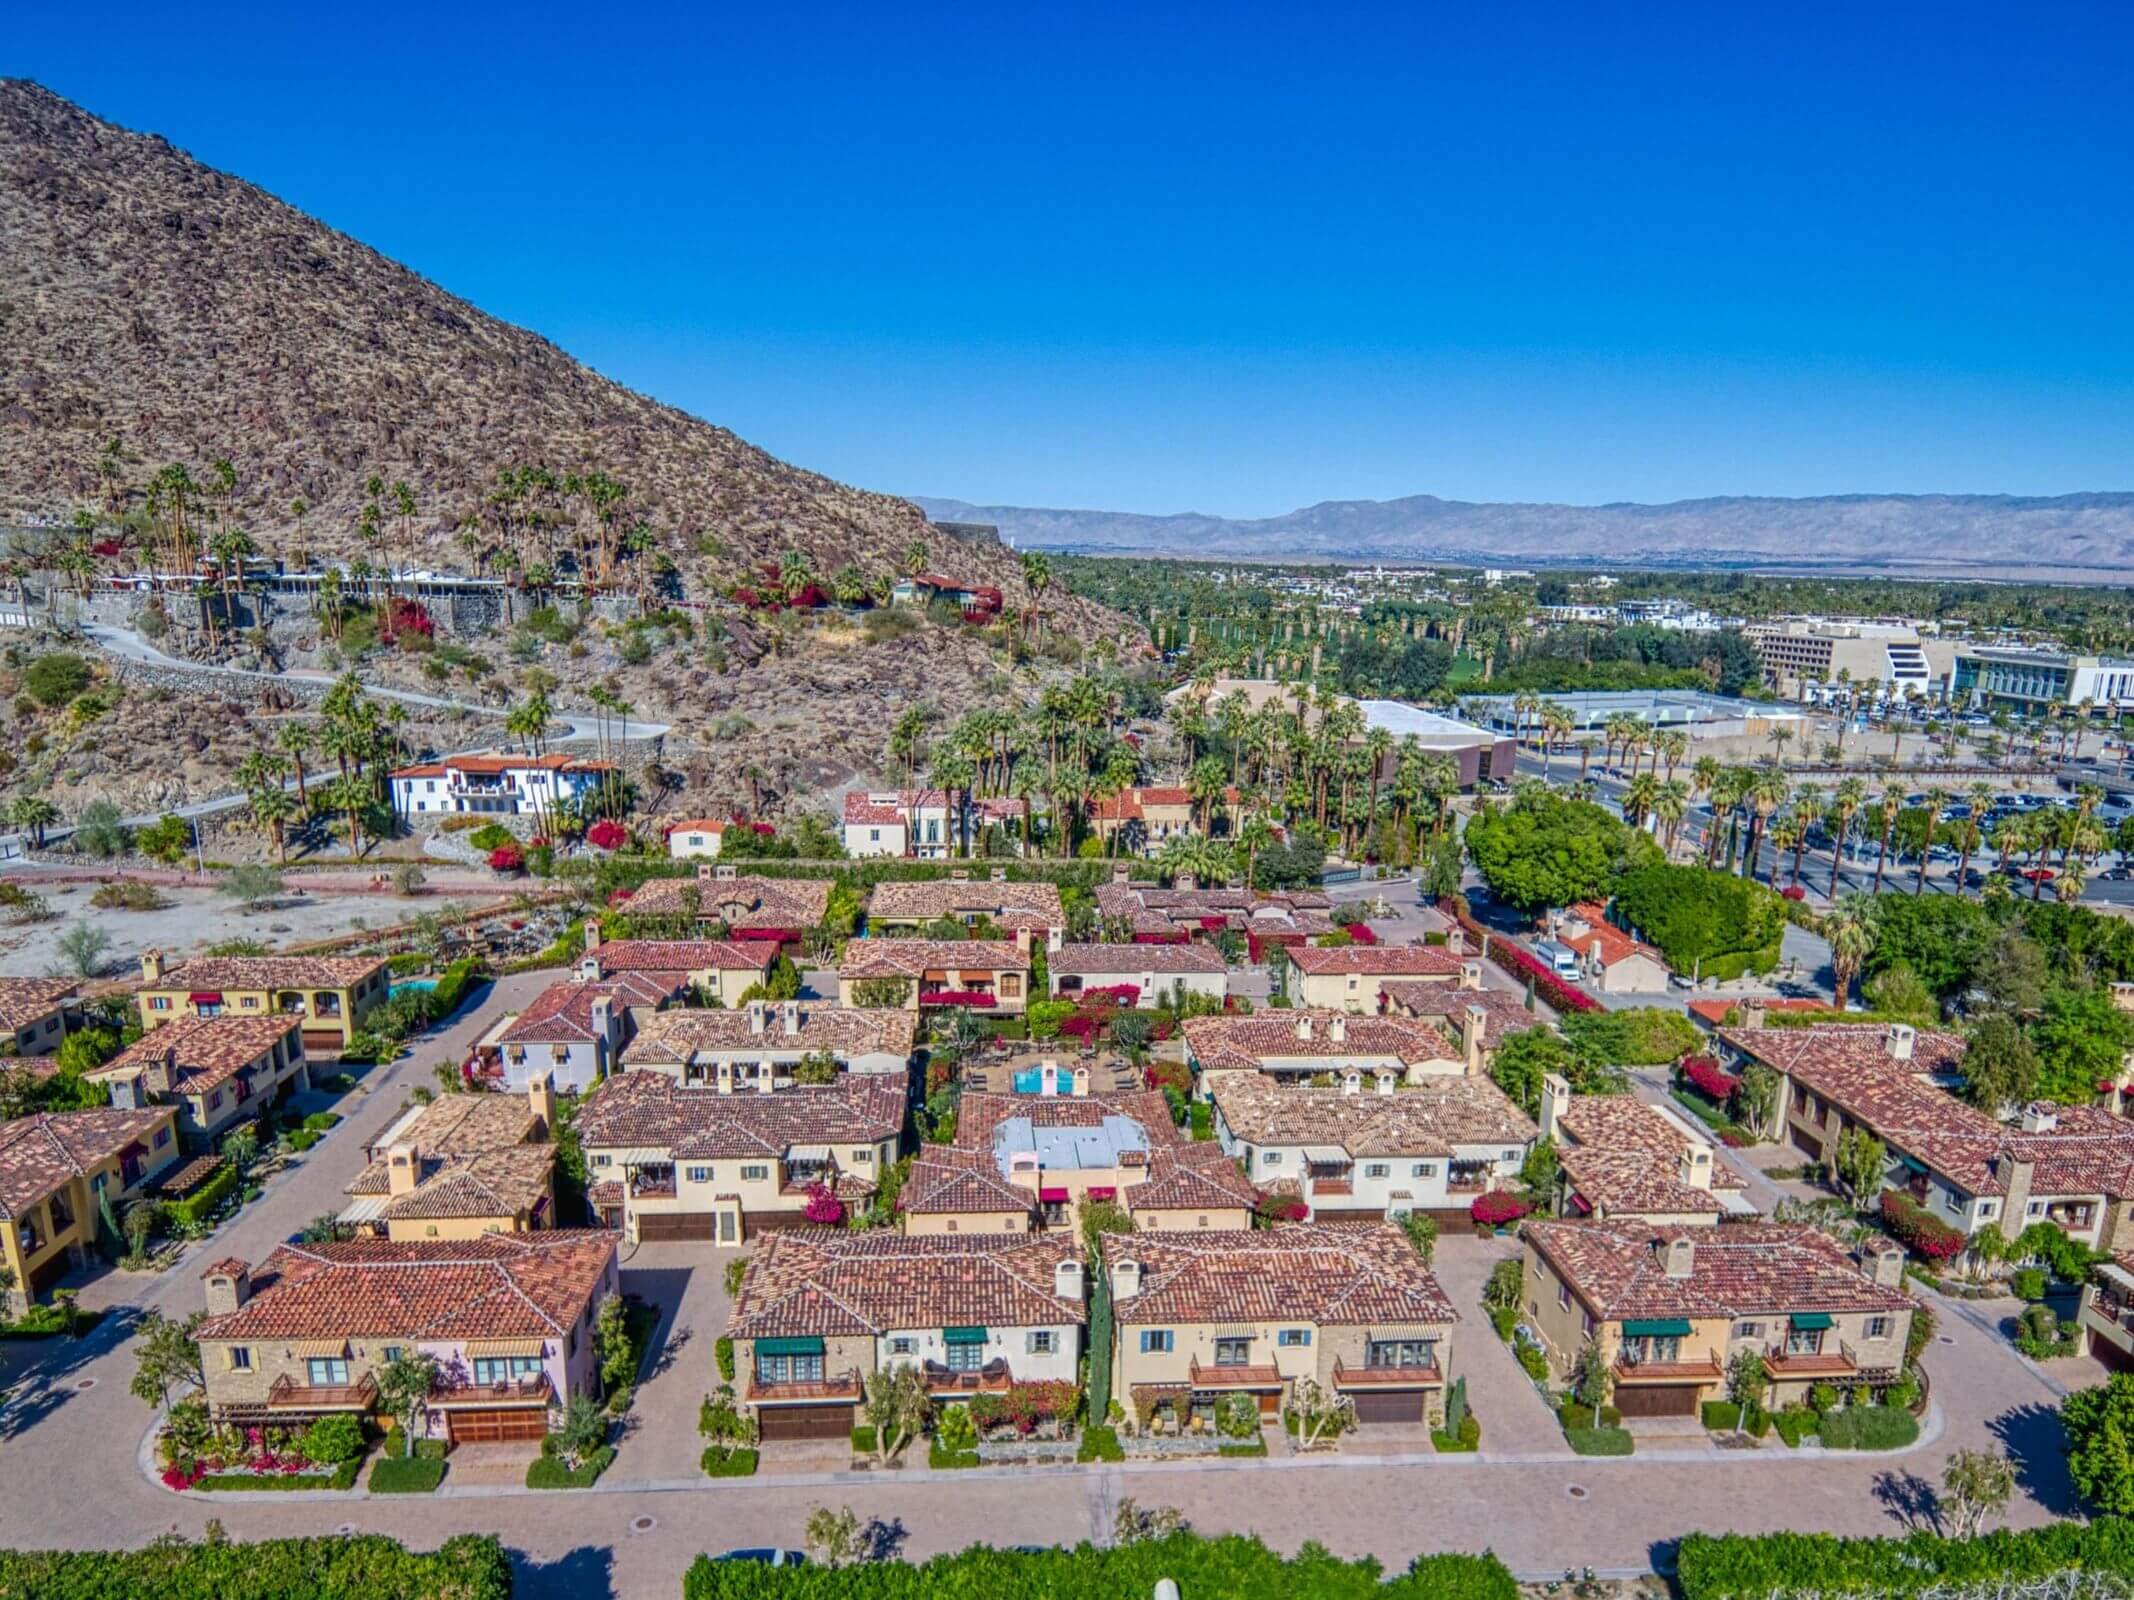 The Villas in Old Palm Springs Homes For Sale